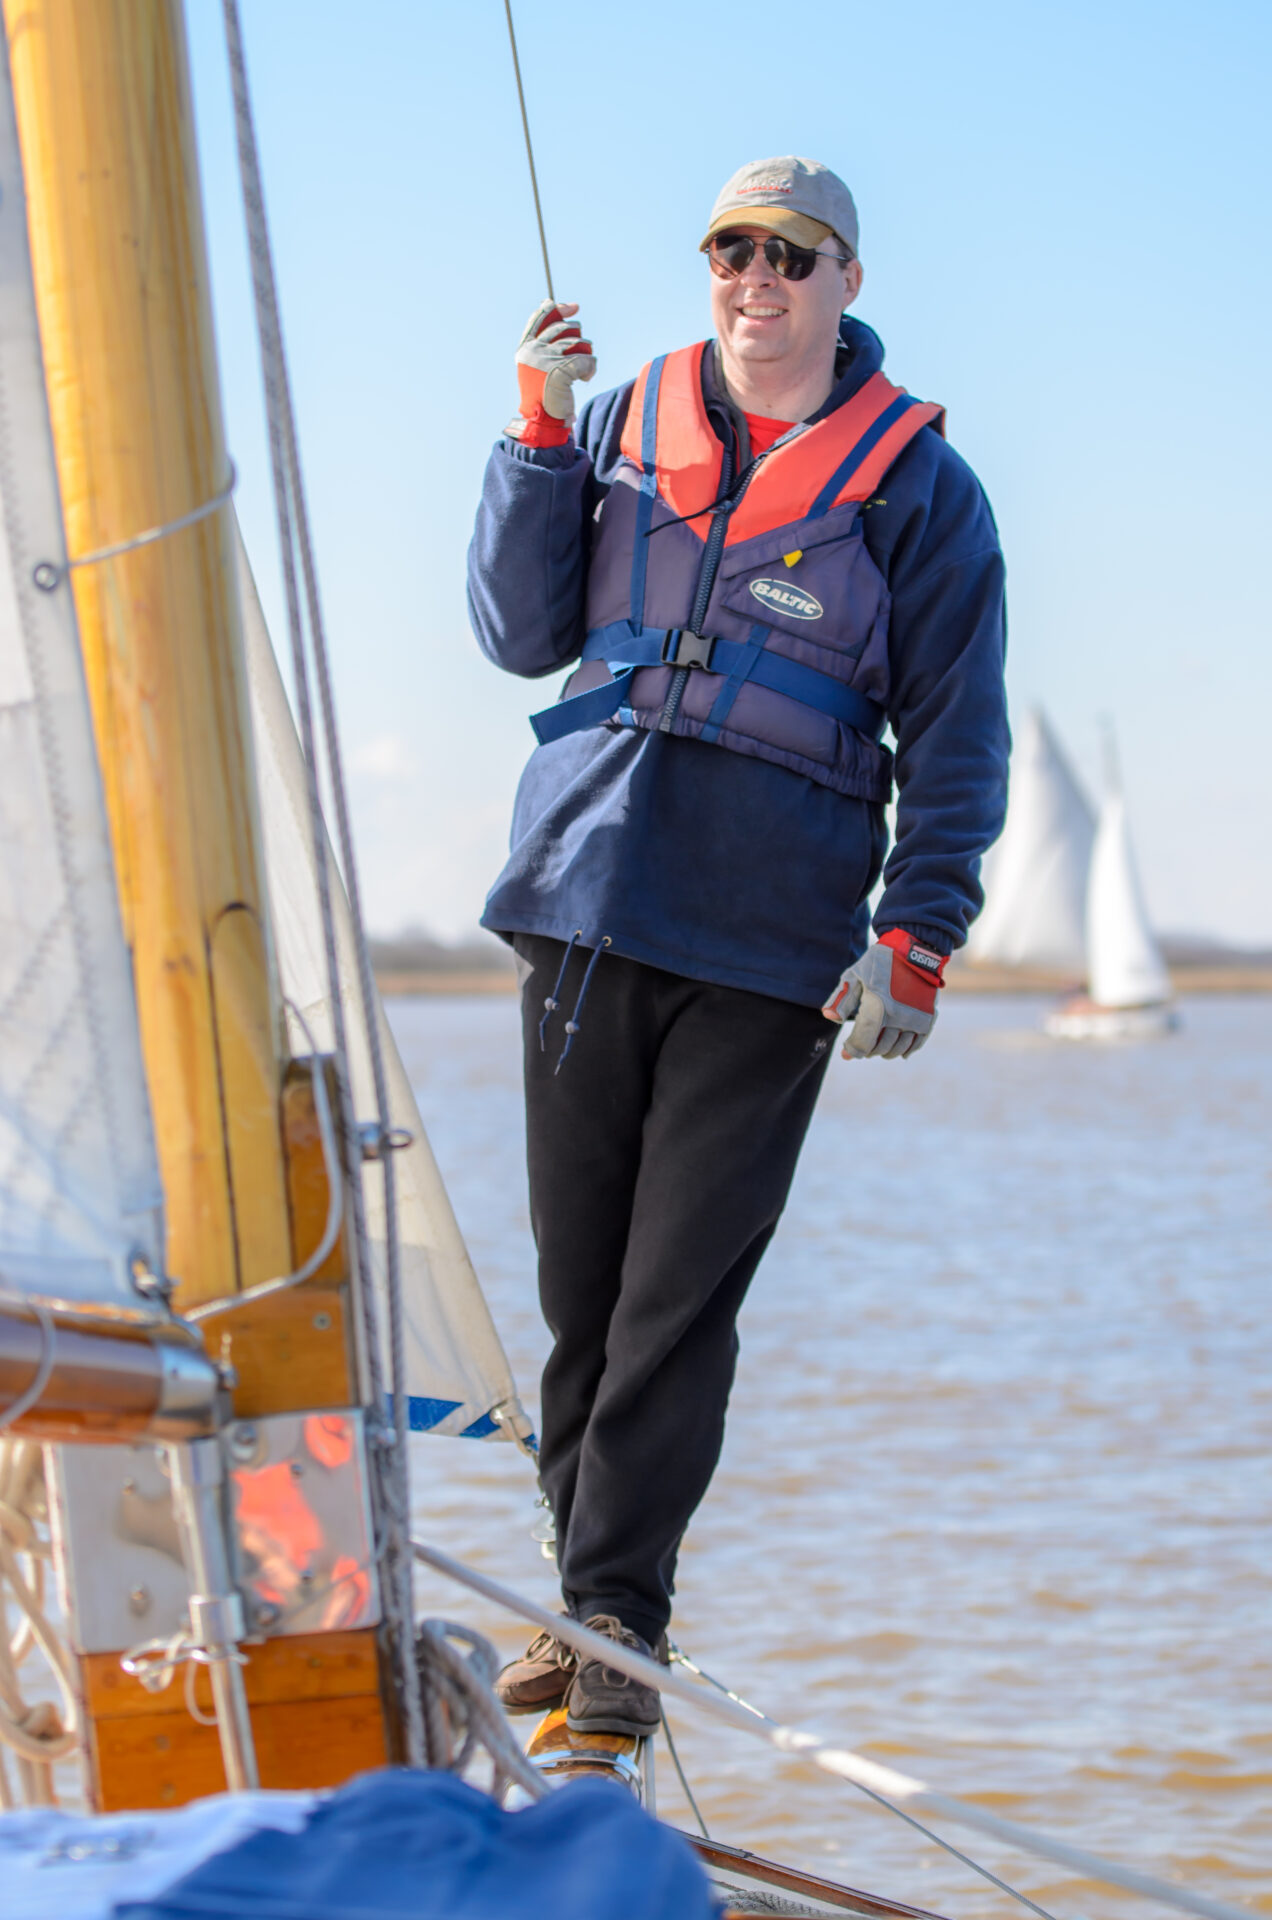 Andy holding on to the sail of a classic sailing yacht